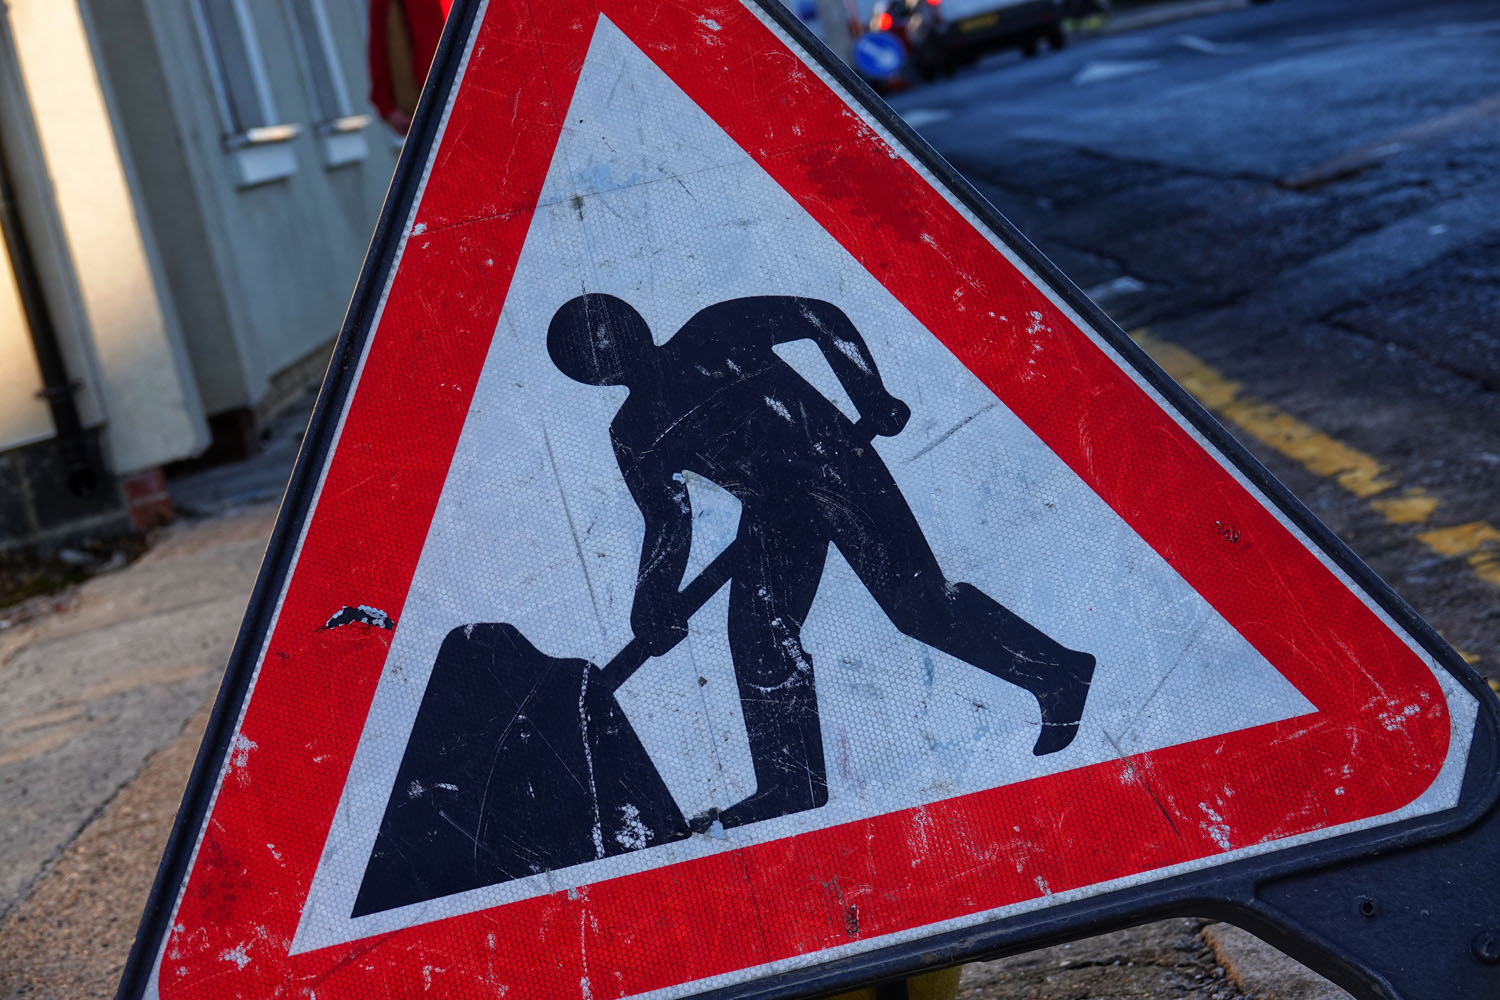 Roadworks are to take place in Hull.